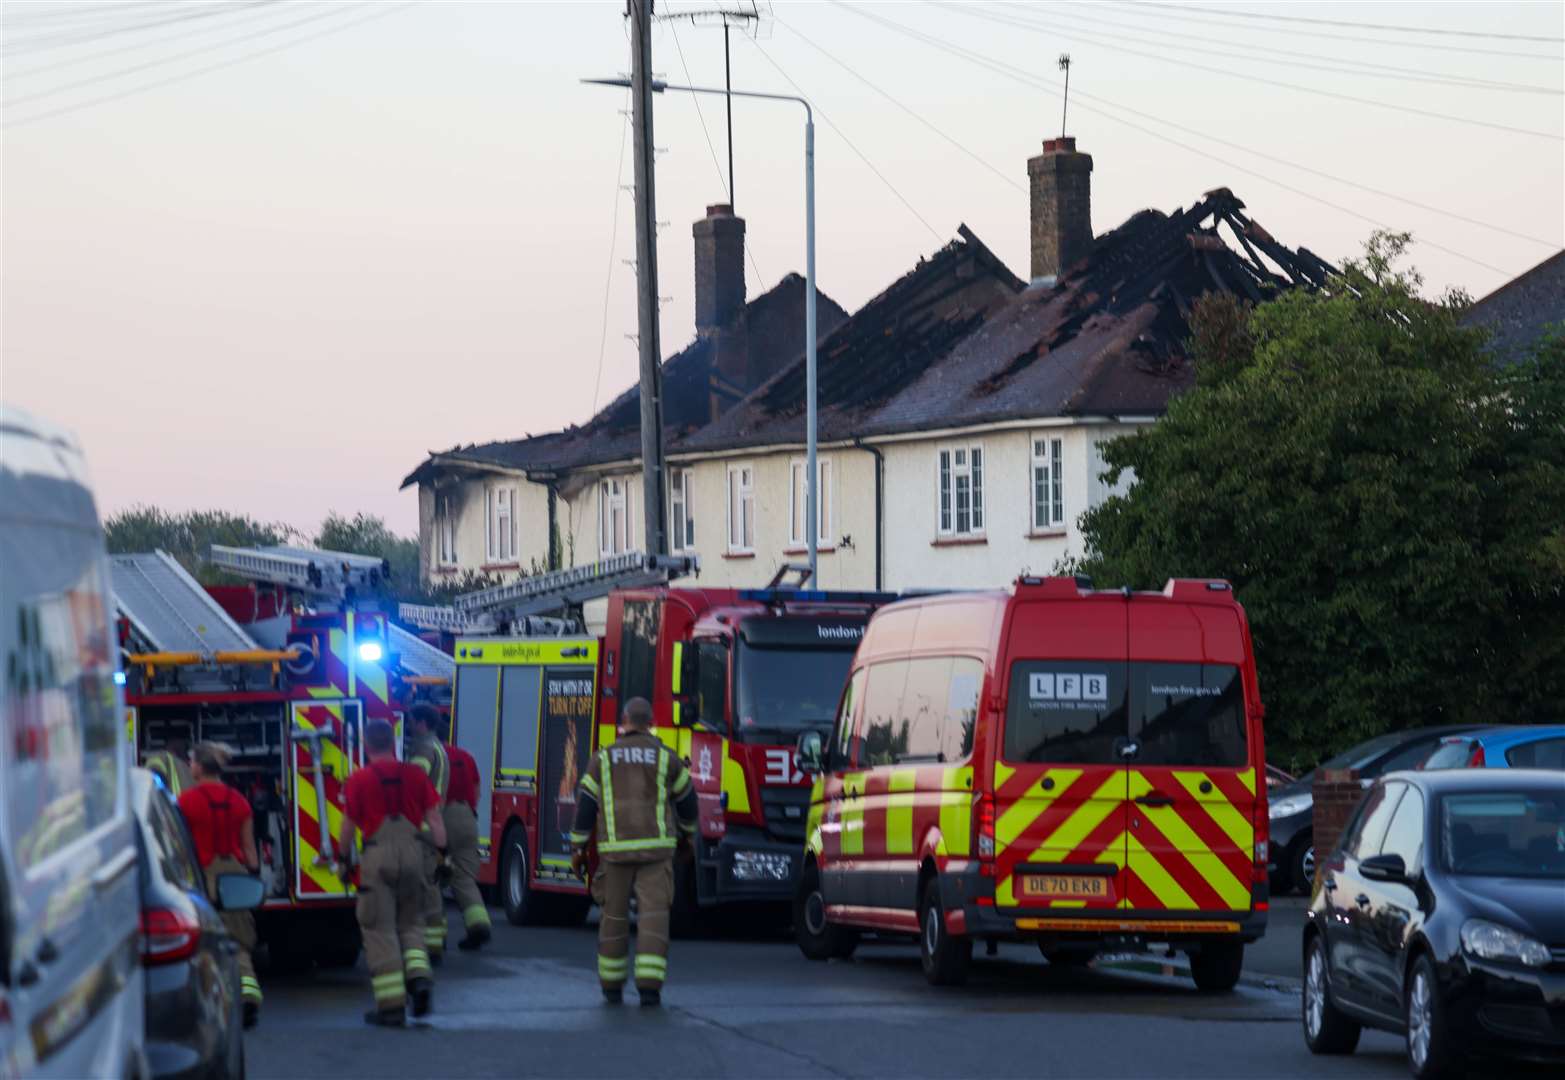 Around 60 firefighters tackled a fire on Crayford Way in Crayford. Photo: UKNIP